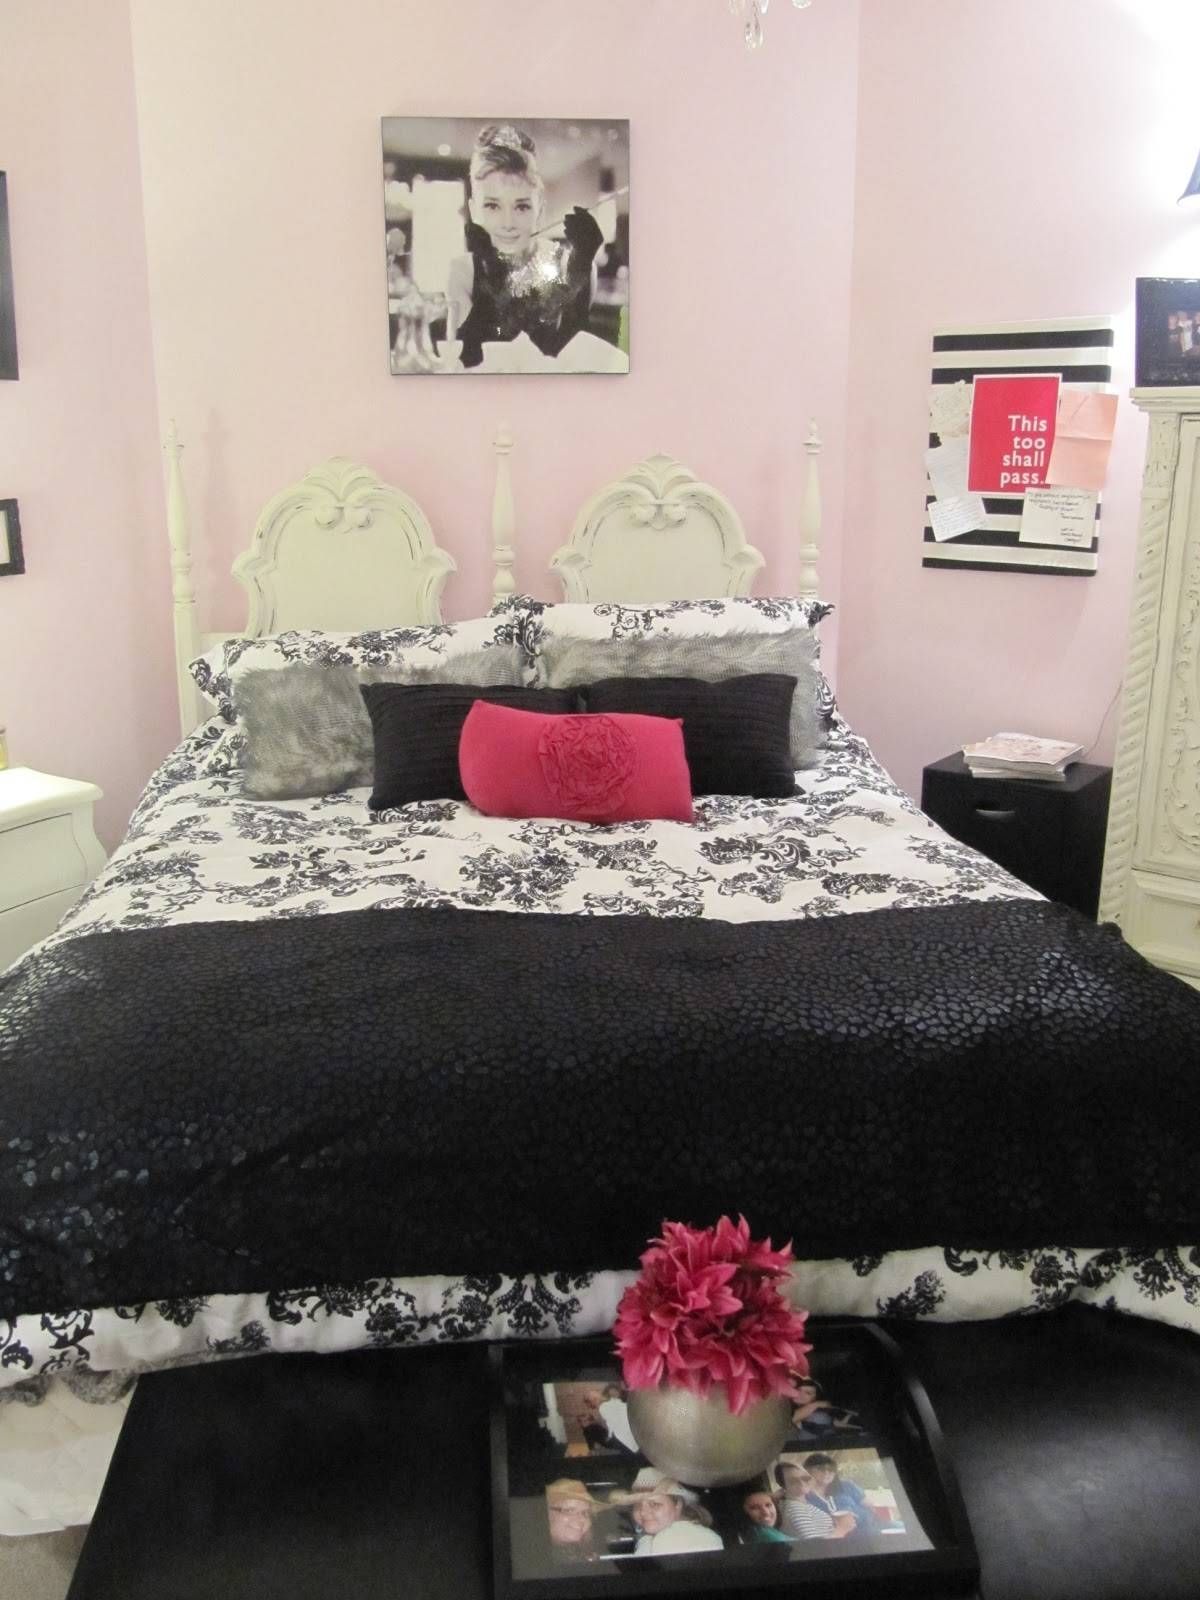 Bedroom Design : Awesome Marilyn Monroe Posters Marilyn Monroe Throughout Best And Newest Marilyn Monroe Wall Art (View 22 of 25)